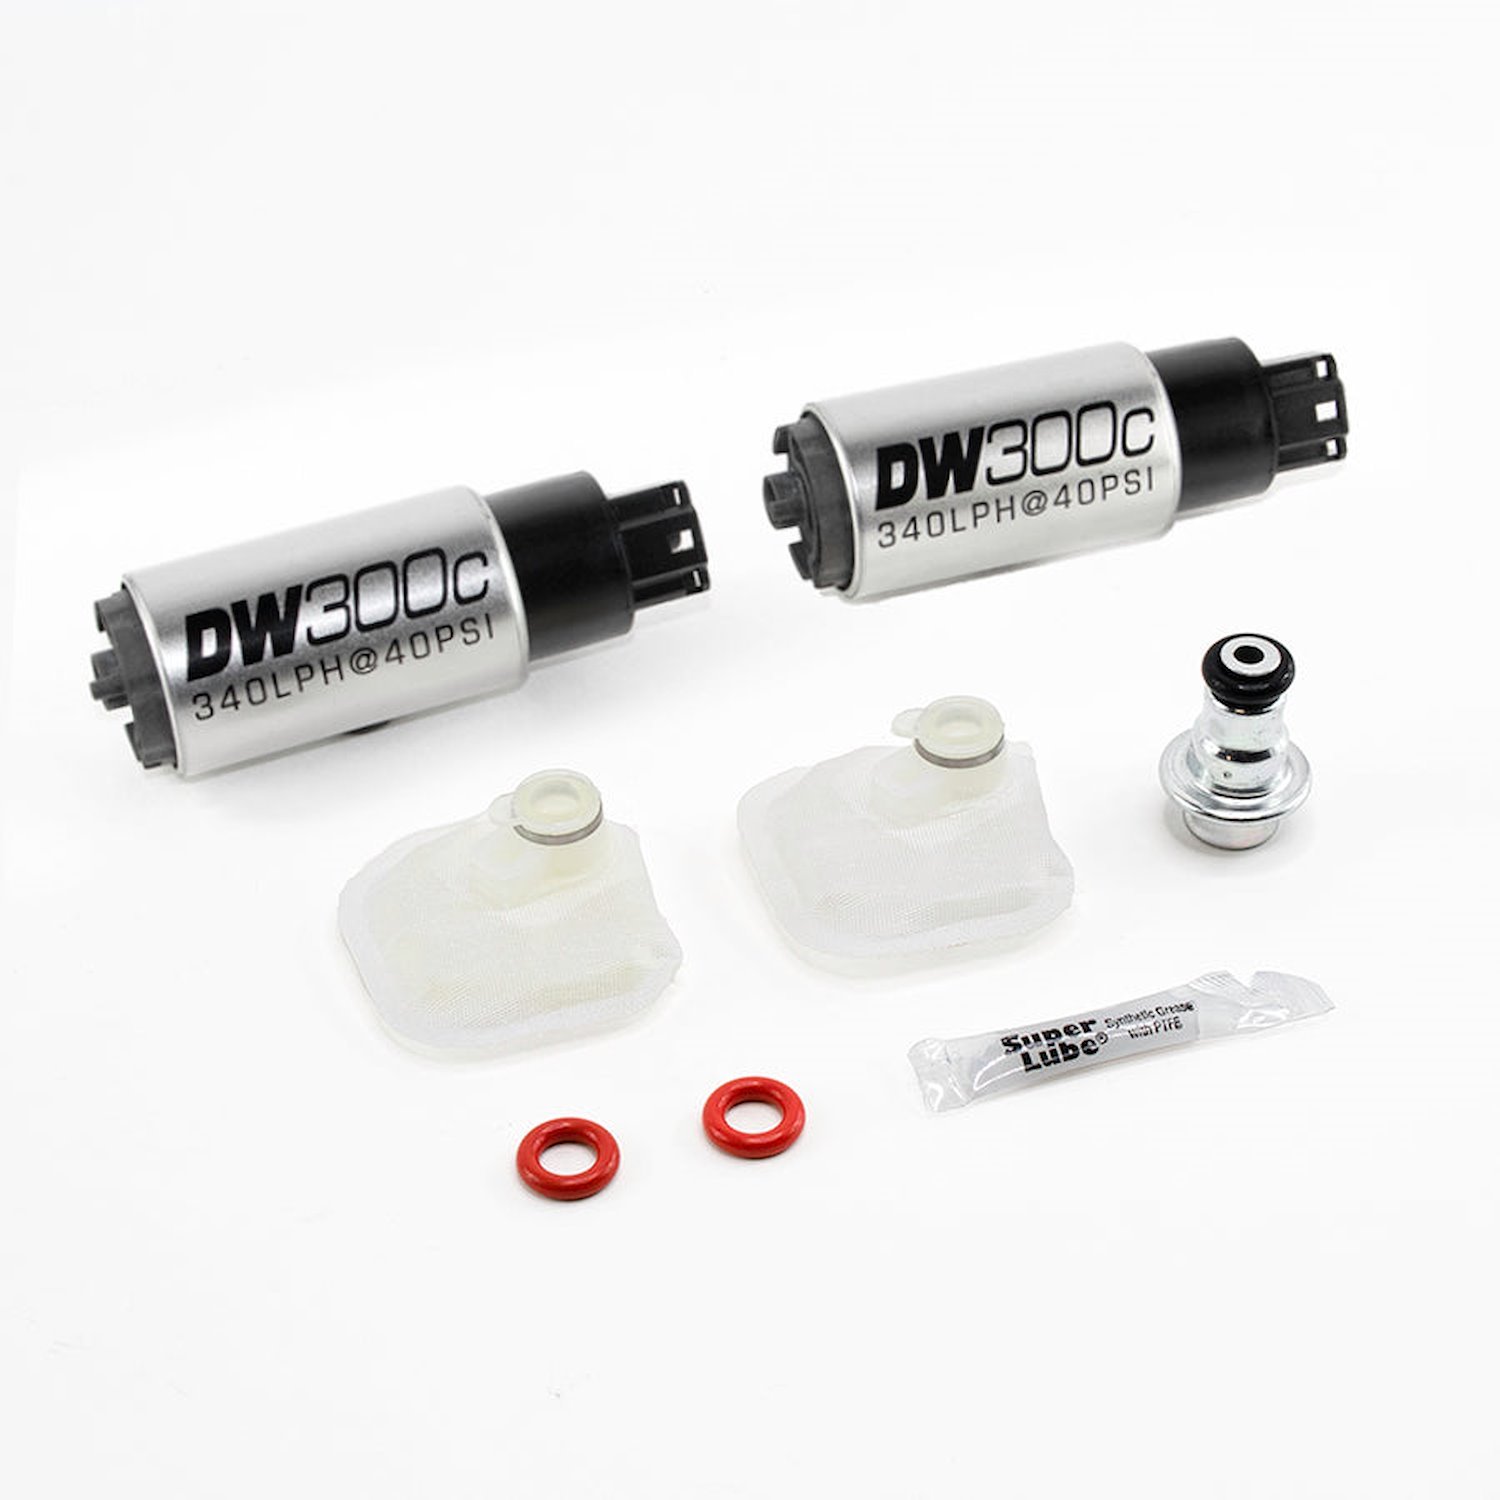 93091039 DW300c series Two 340lph compact in-tank fuel pumps w/ mounting clips w/ install kit for 09-15 Cadillac CTS-V